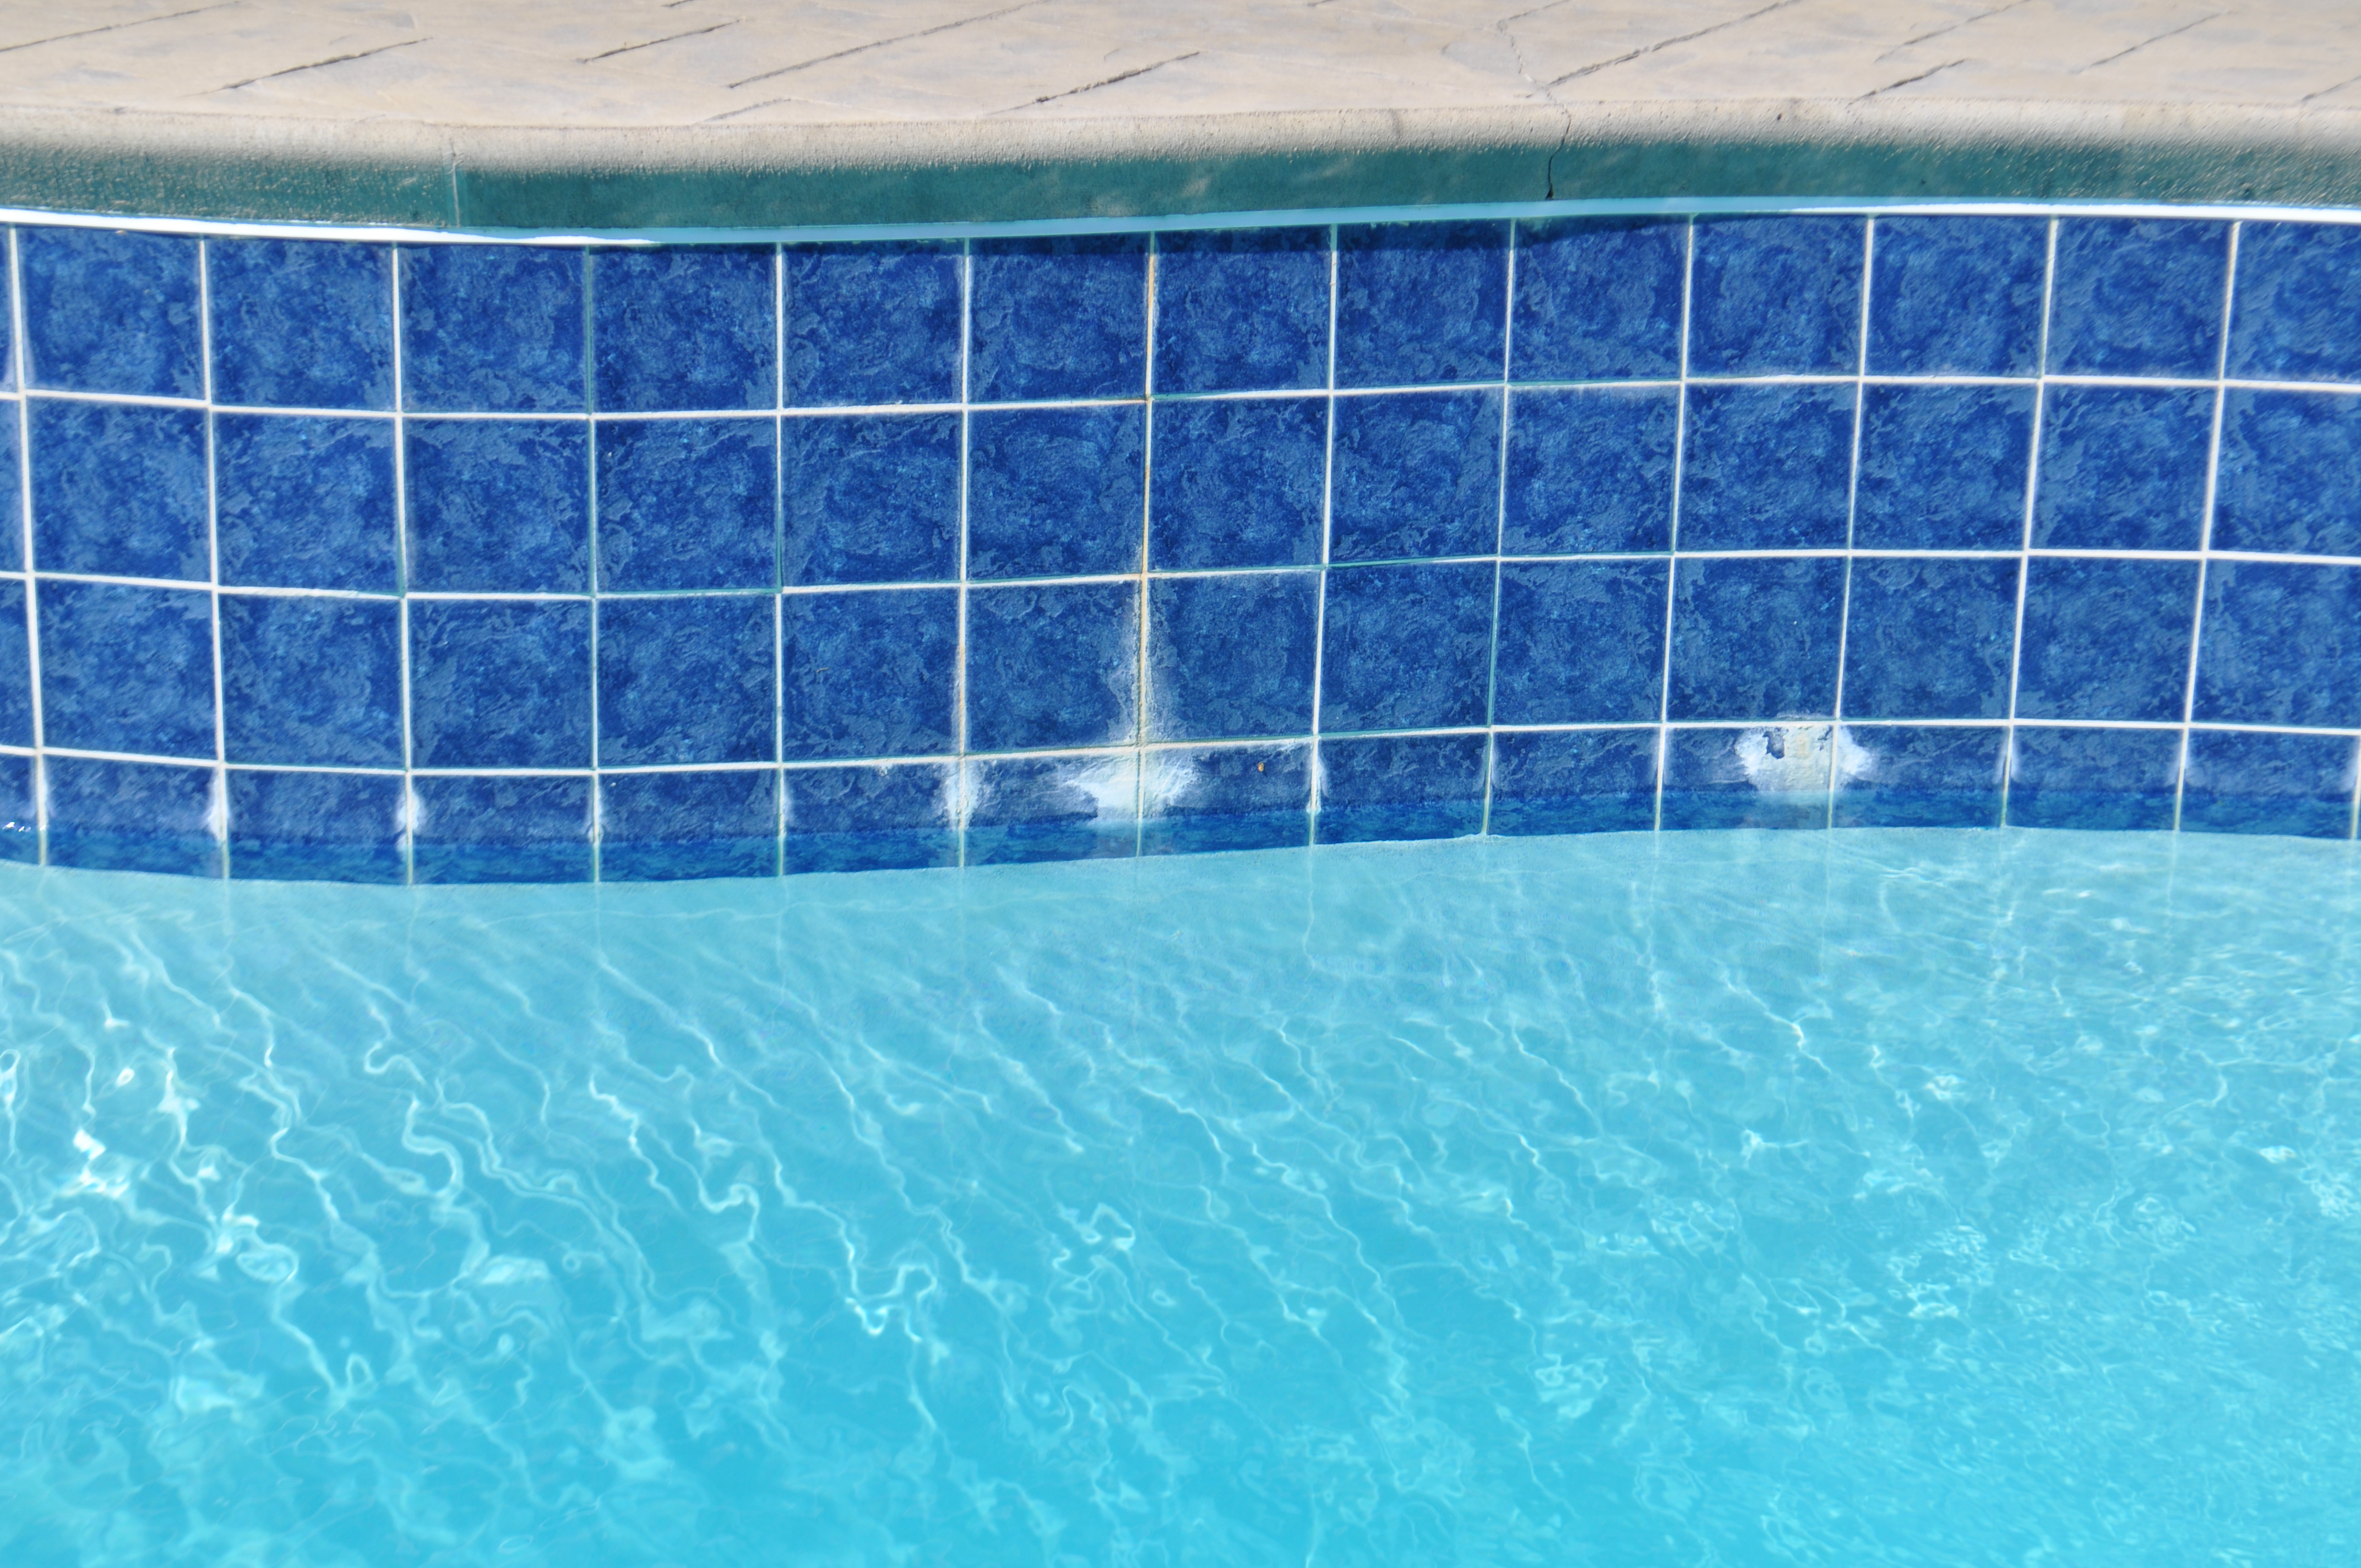 Grout Efflorescence In Several Areas, Grout For Swimming Pool Tiles